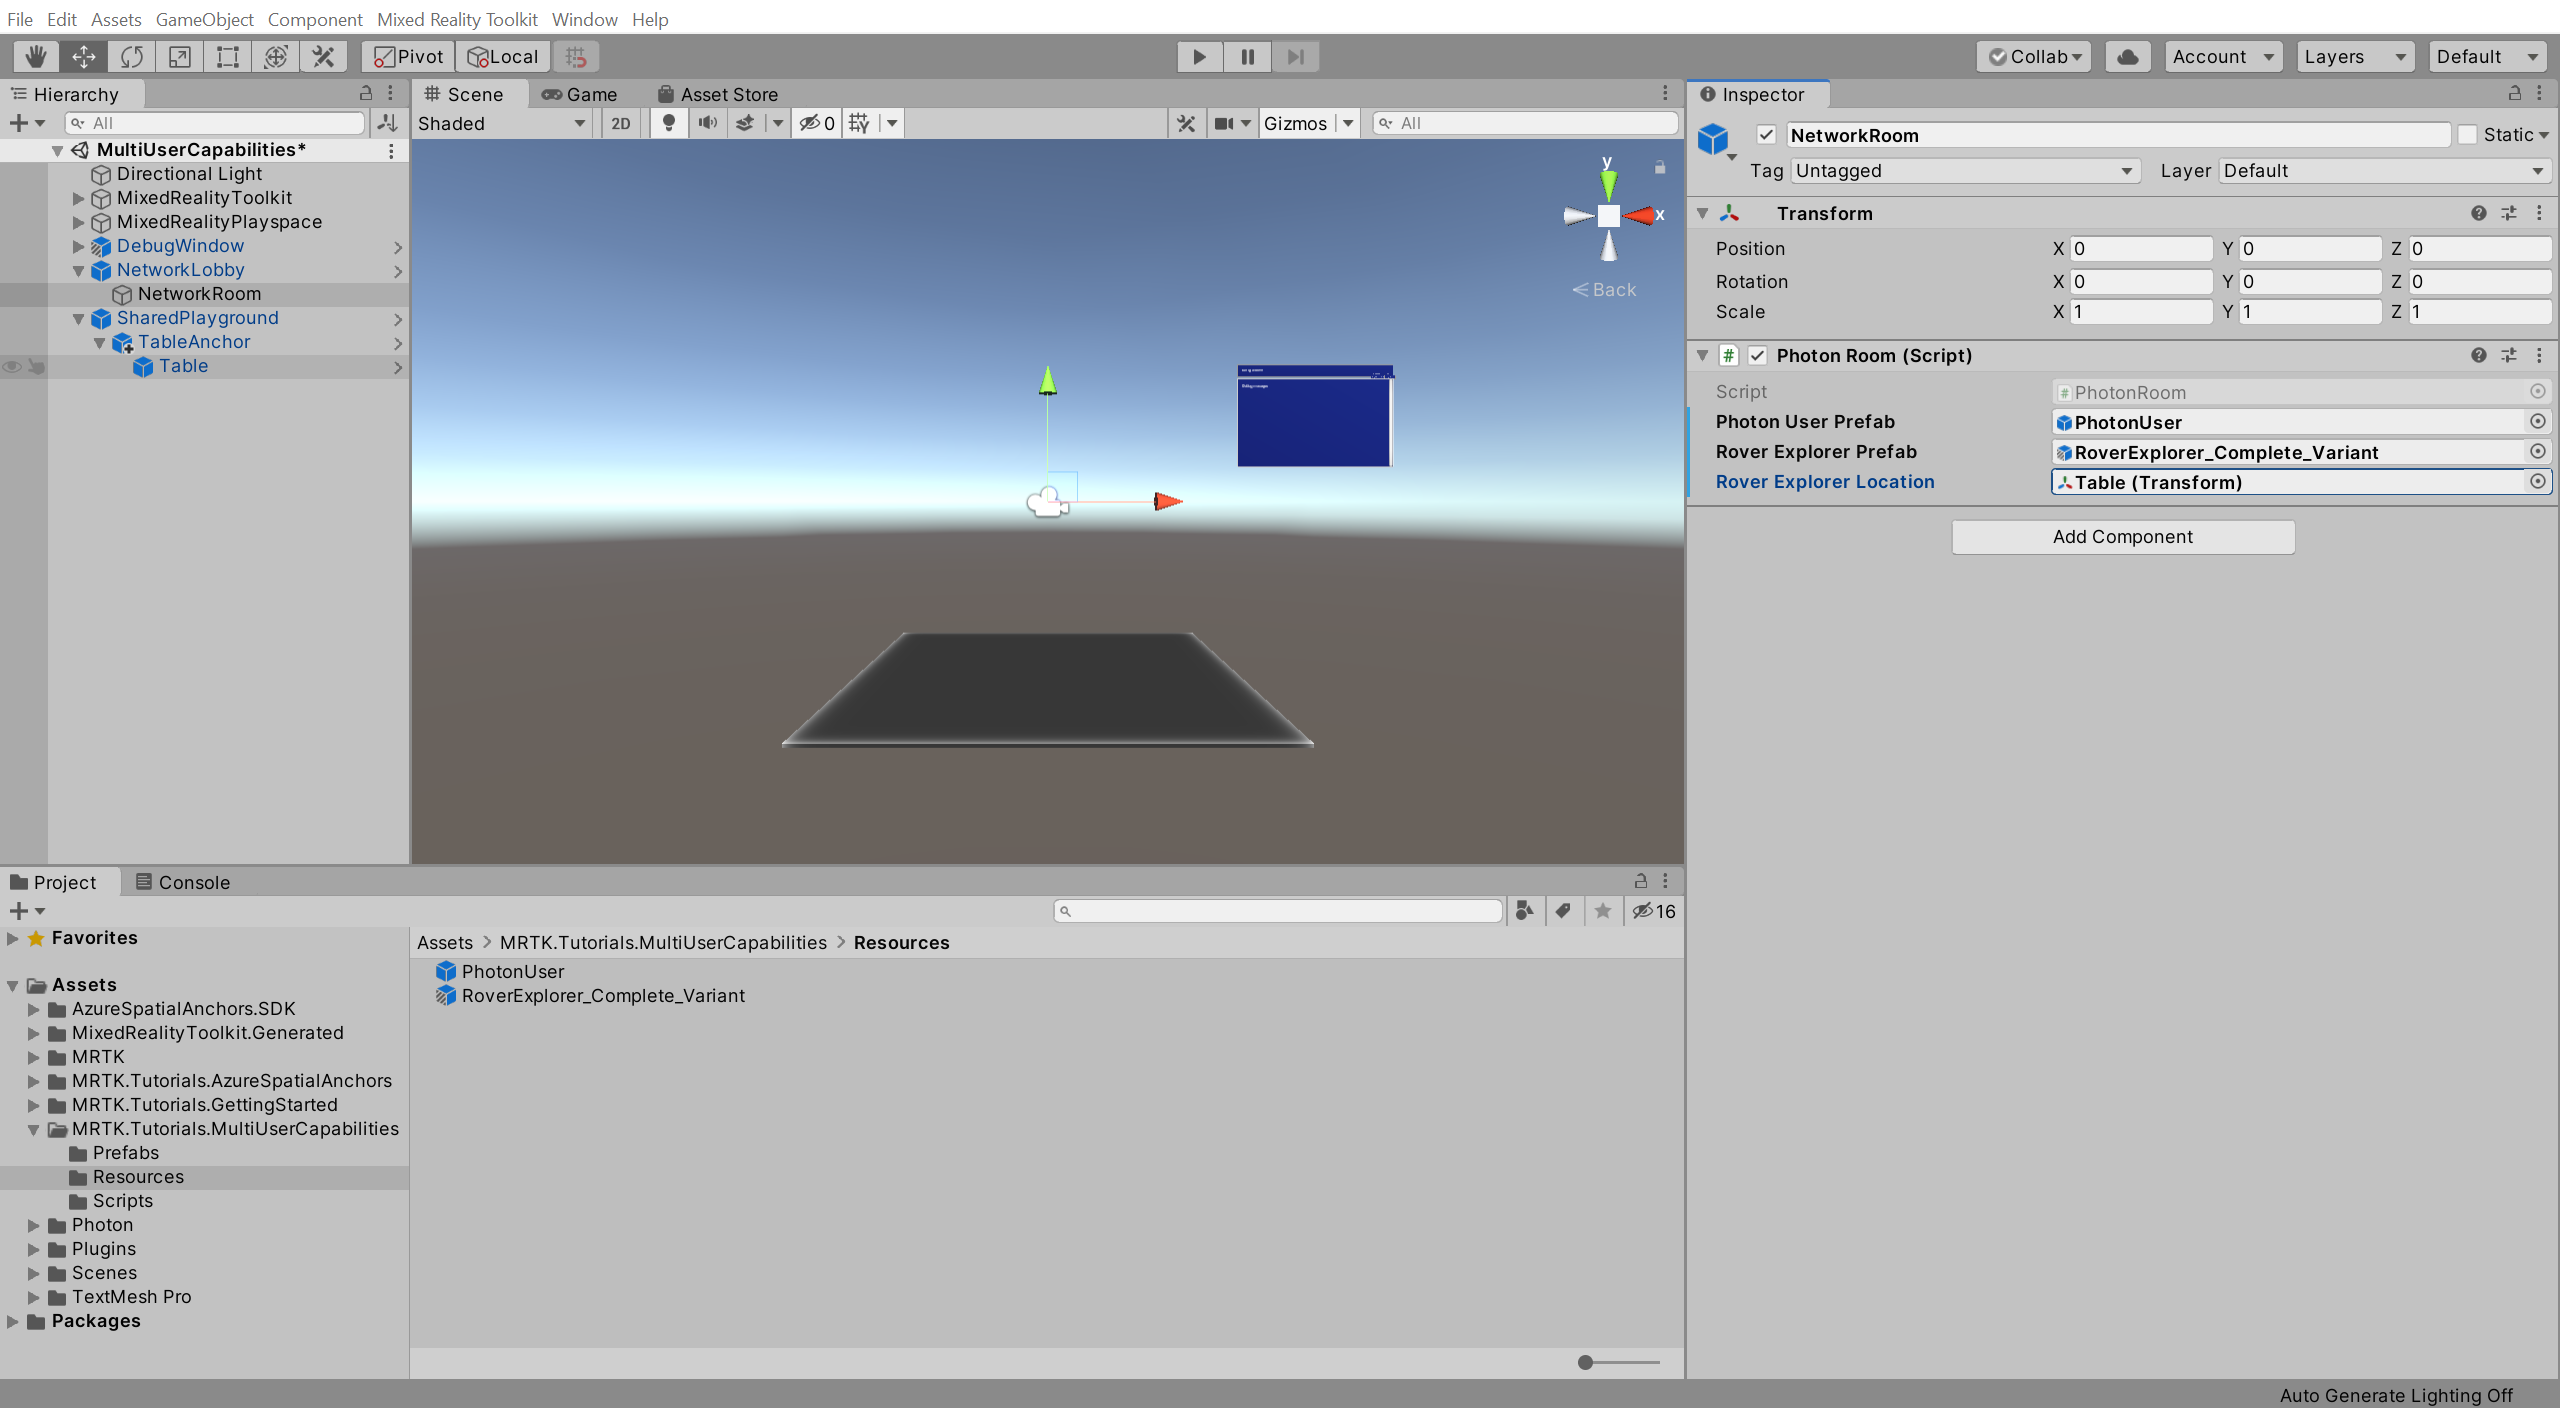 Unity with Photon Room component configured